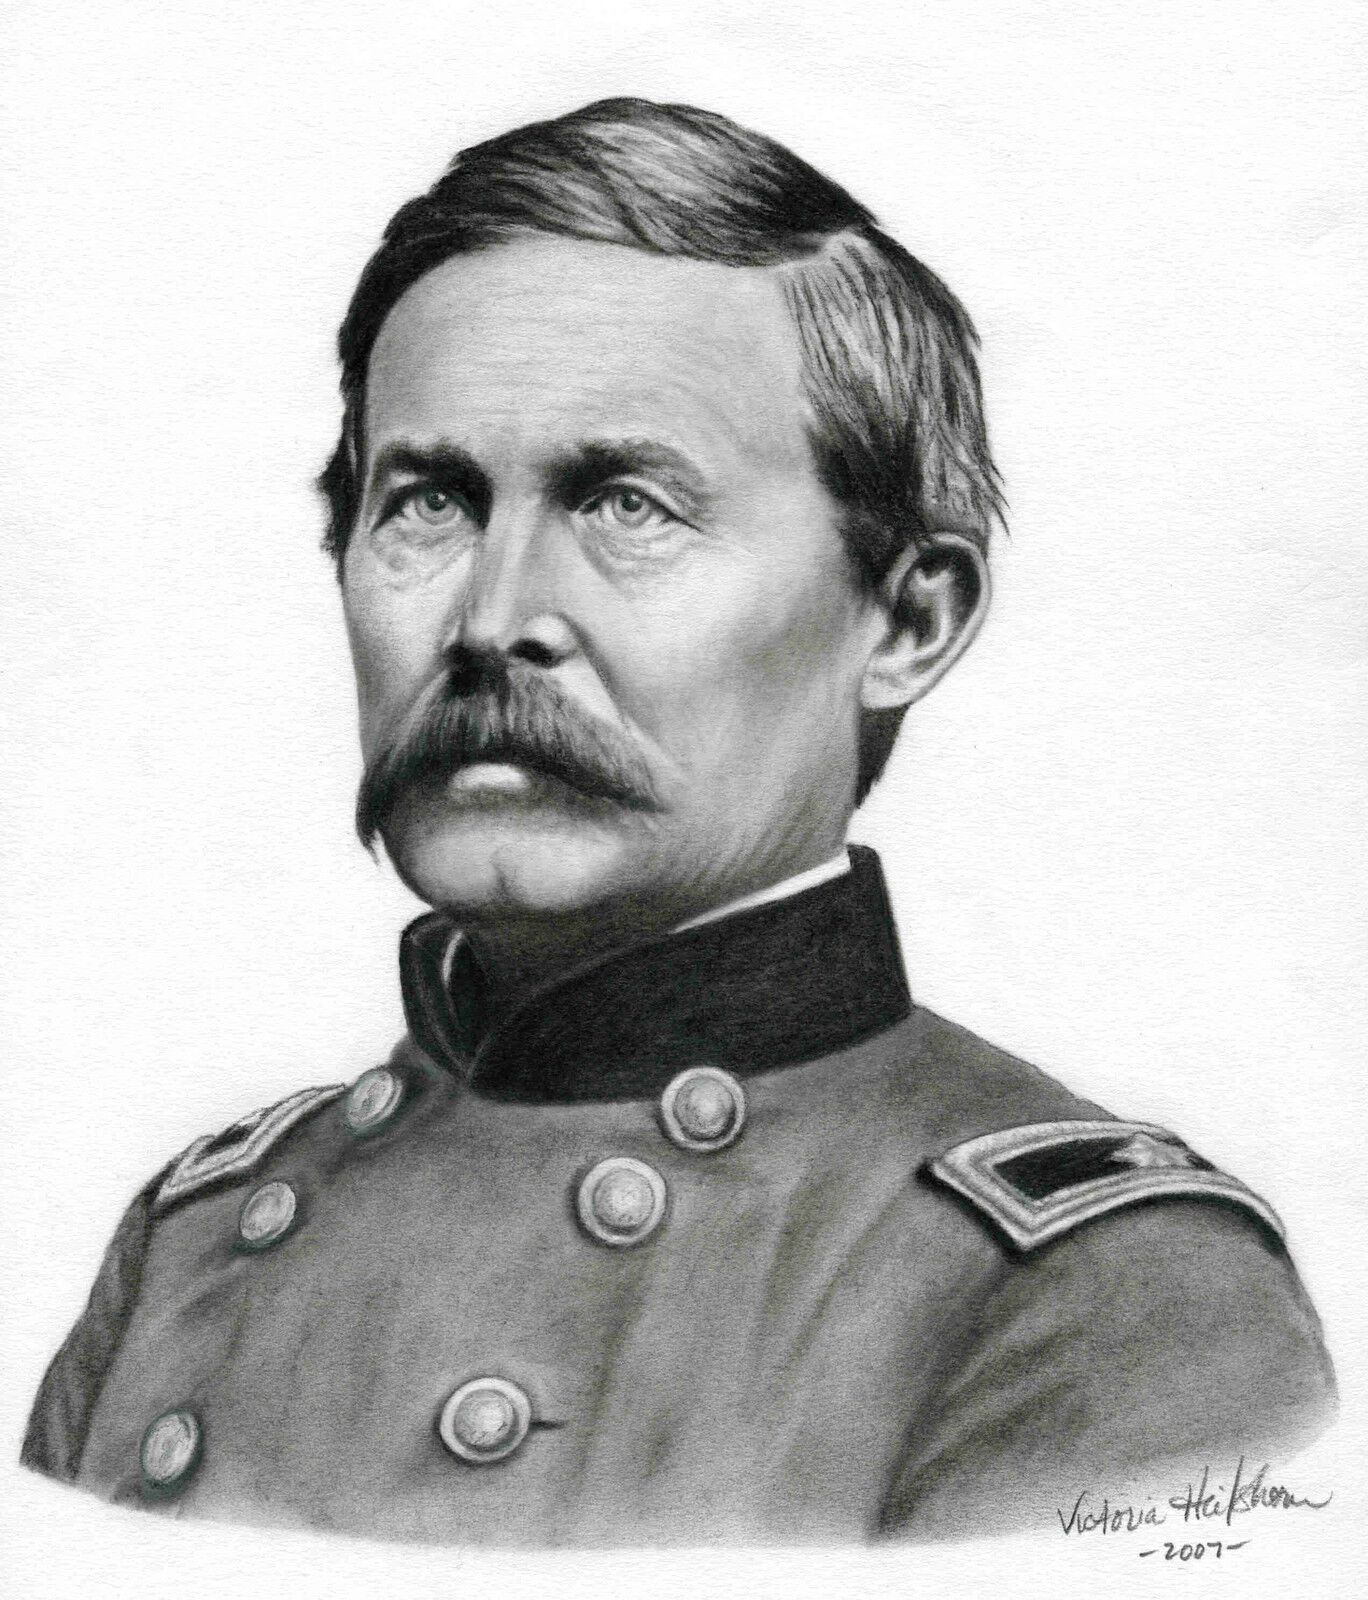 Union General John Buford Limited Edition Signed/Numbered Civil War Art Print